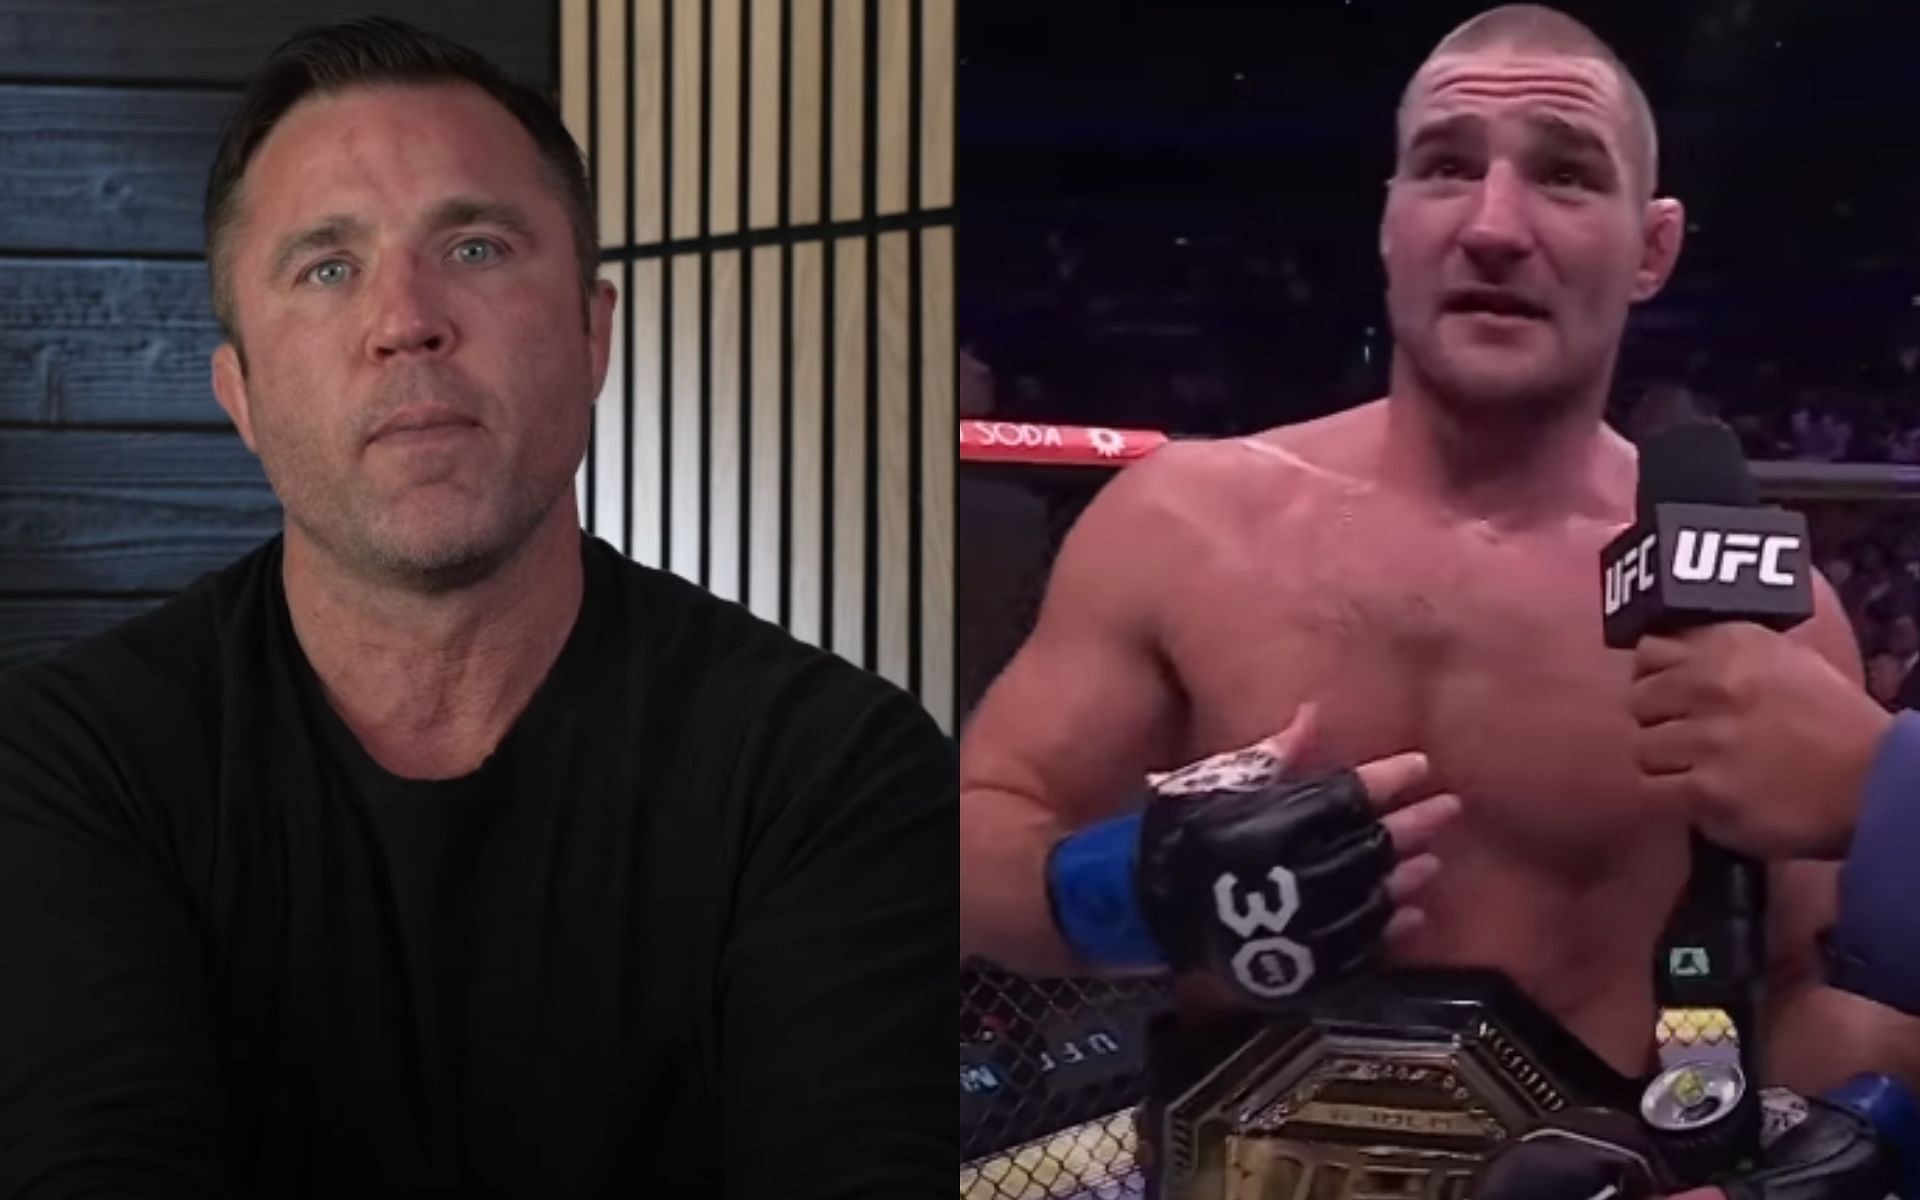 Chael Sonnen [Left] predicts middleweight [Sean Strickland pictured on the right] will be most exciting division [Image courtesy: Chael Sonnen and UFC - YouTube]